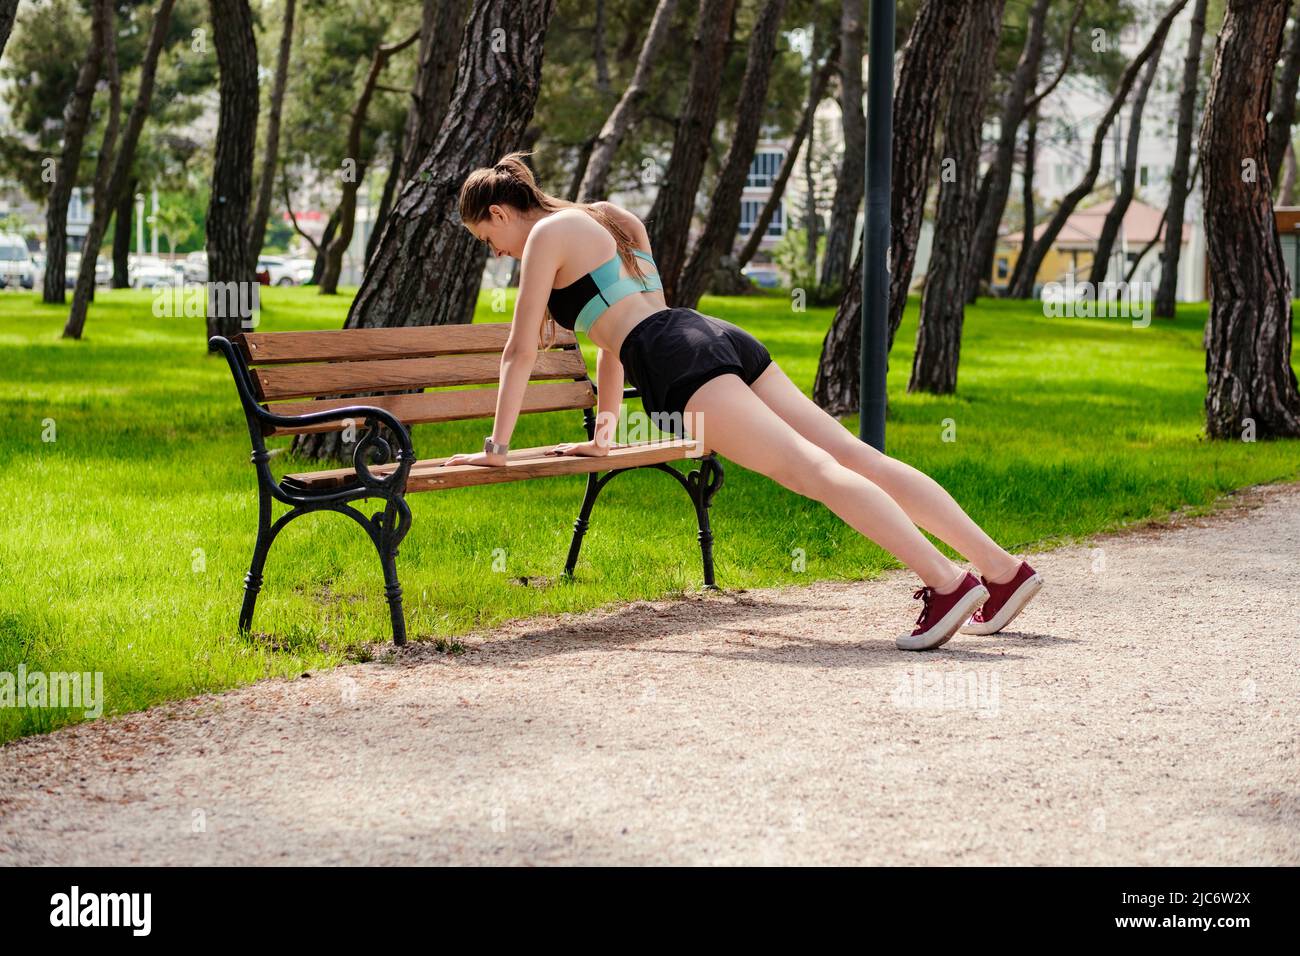 https://c8.alamy.com/comp/2JC6W2X/young-caucasian-woman-wearing-black-sports-bra-standing-on-city-park-outdoors-doing-push-ups-on-a-park-bench-healthy-lifestyle-workout-training-e-2JC6W2X.jpg